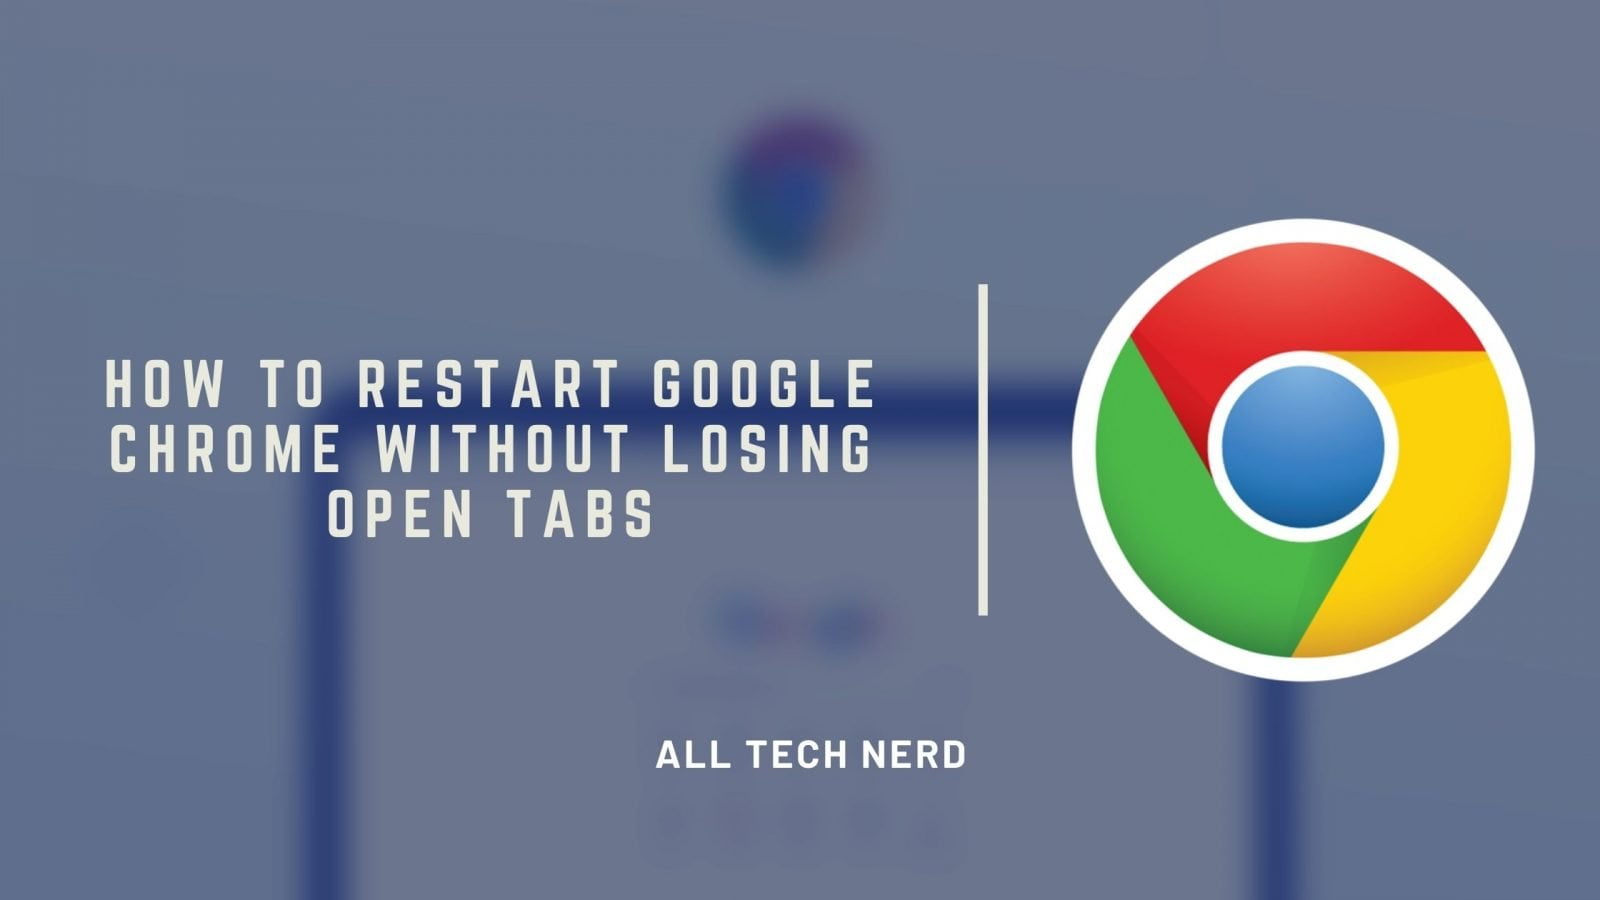 How to Restart Google Chrome Without Losing Open Tabs